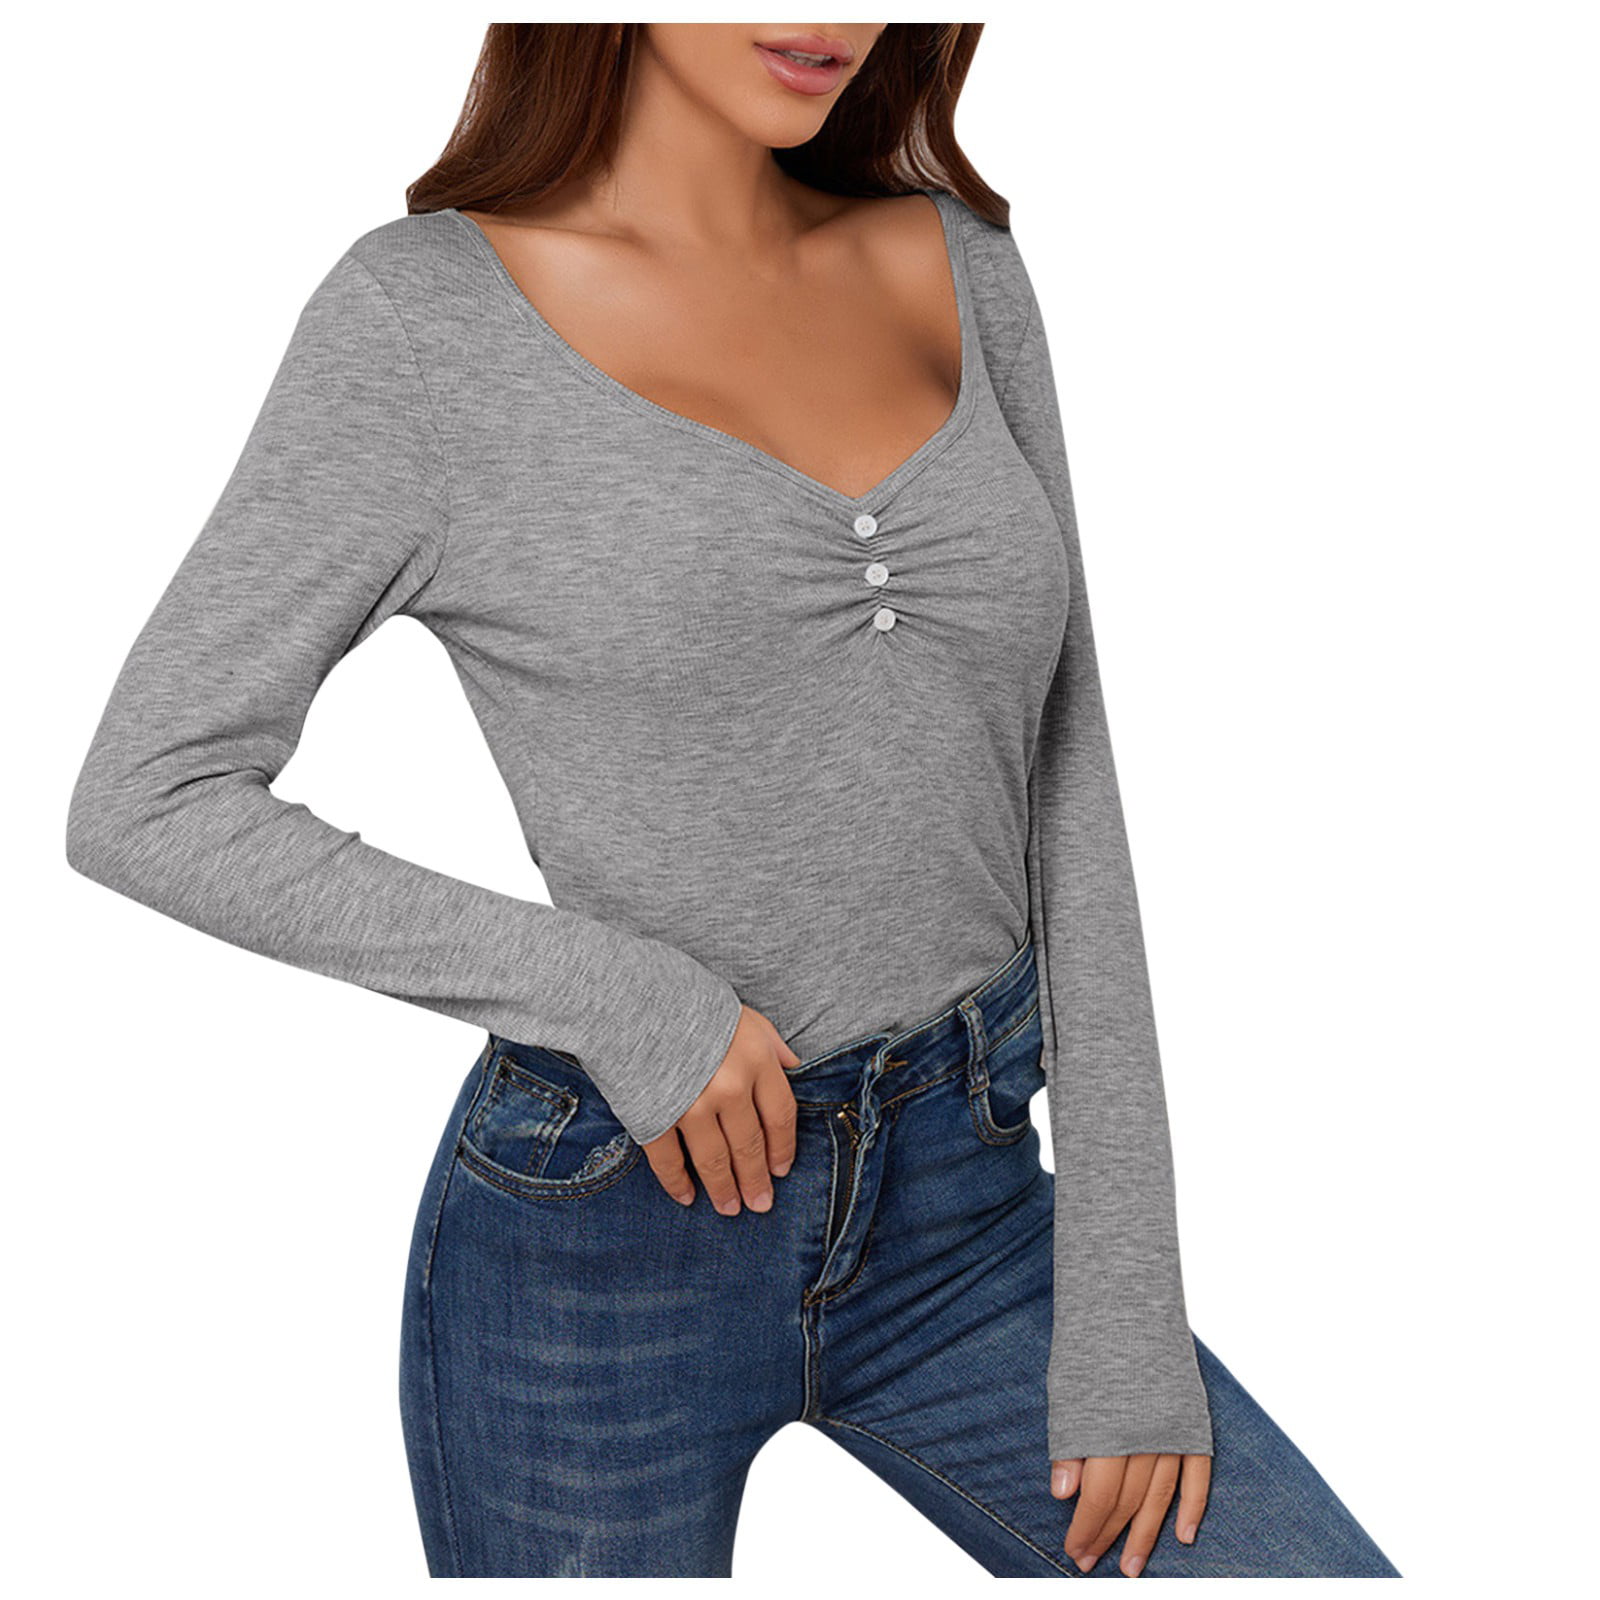 vbnergoie Womens Long Sleeve V Neck Solid Color Tops Loose Casual T-Shirt  Blouse Women Solid Shirt Shirts Men 